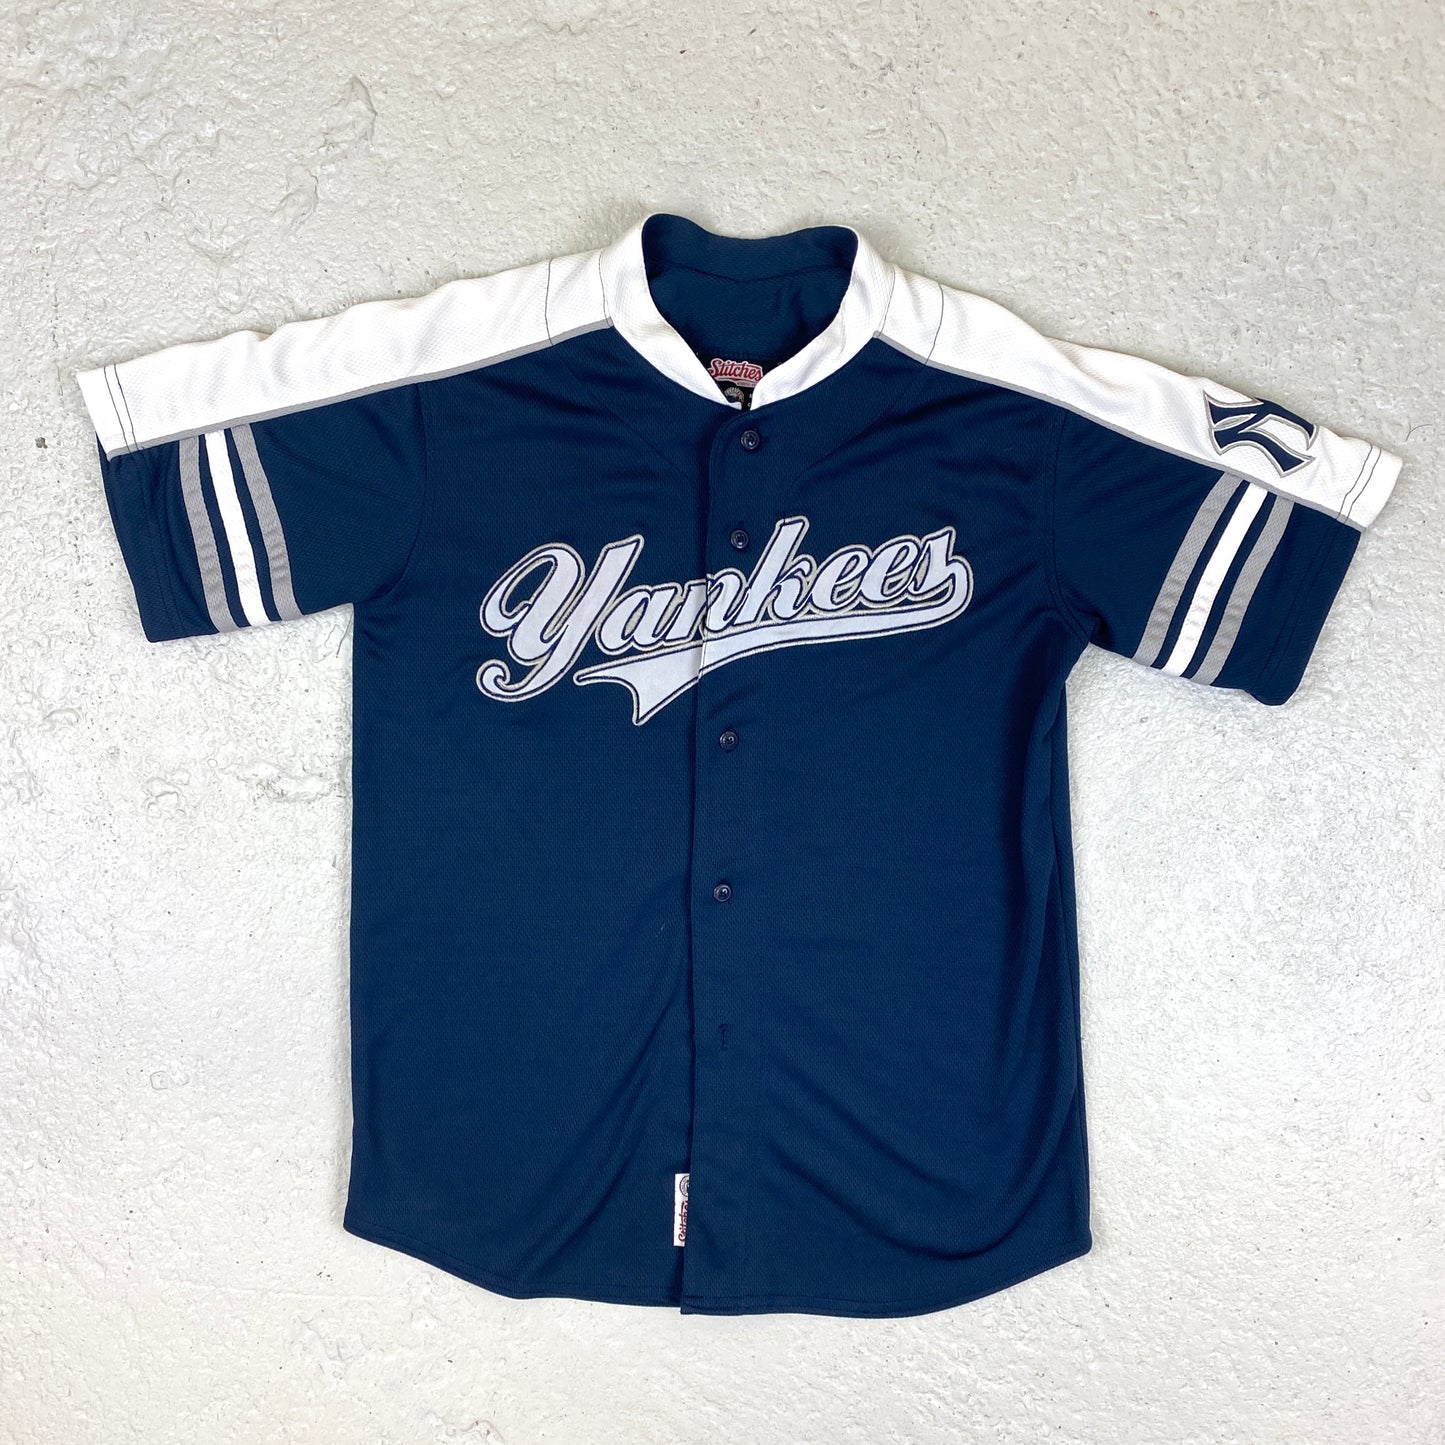 New York Yankees embroidered jersey shirt (XS-S)